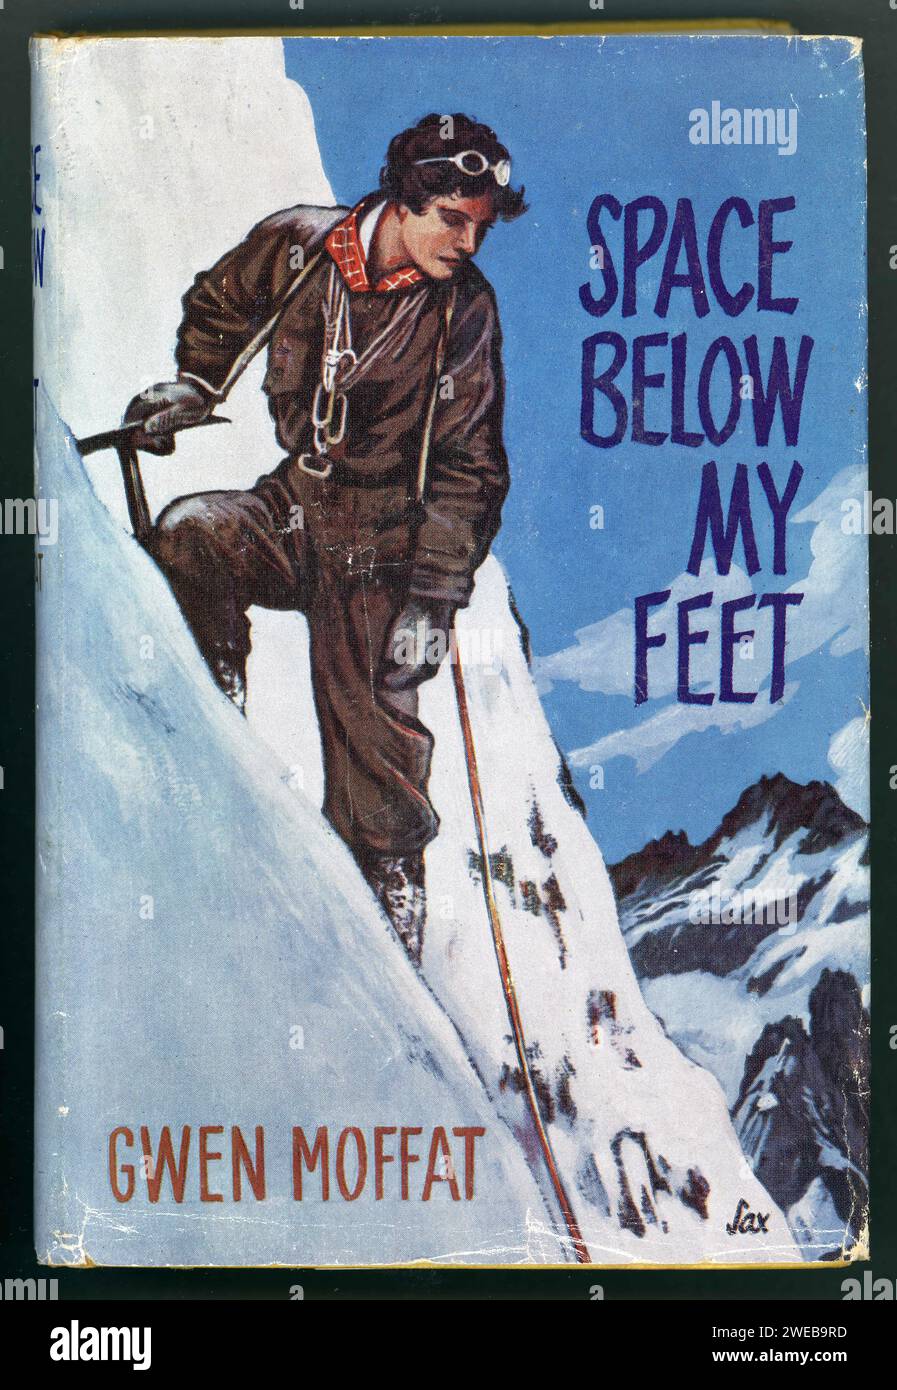 Space Below My Feet by Gwen Moffat, original 1960's illustration for the book cover - A classic mountaineering memoir . Published in 1961, U.K. Stock Photo